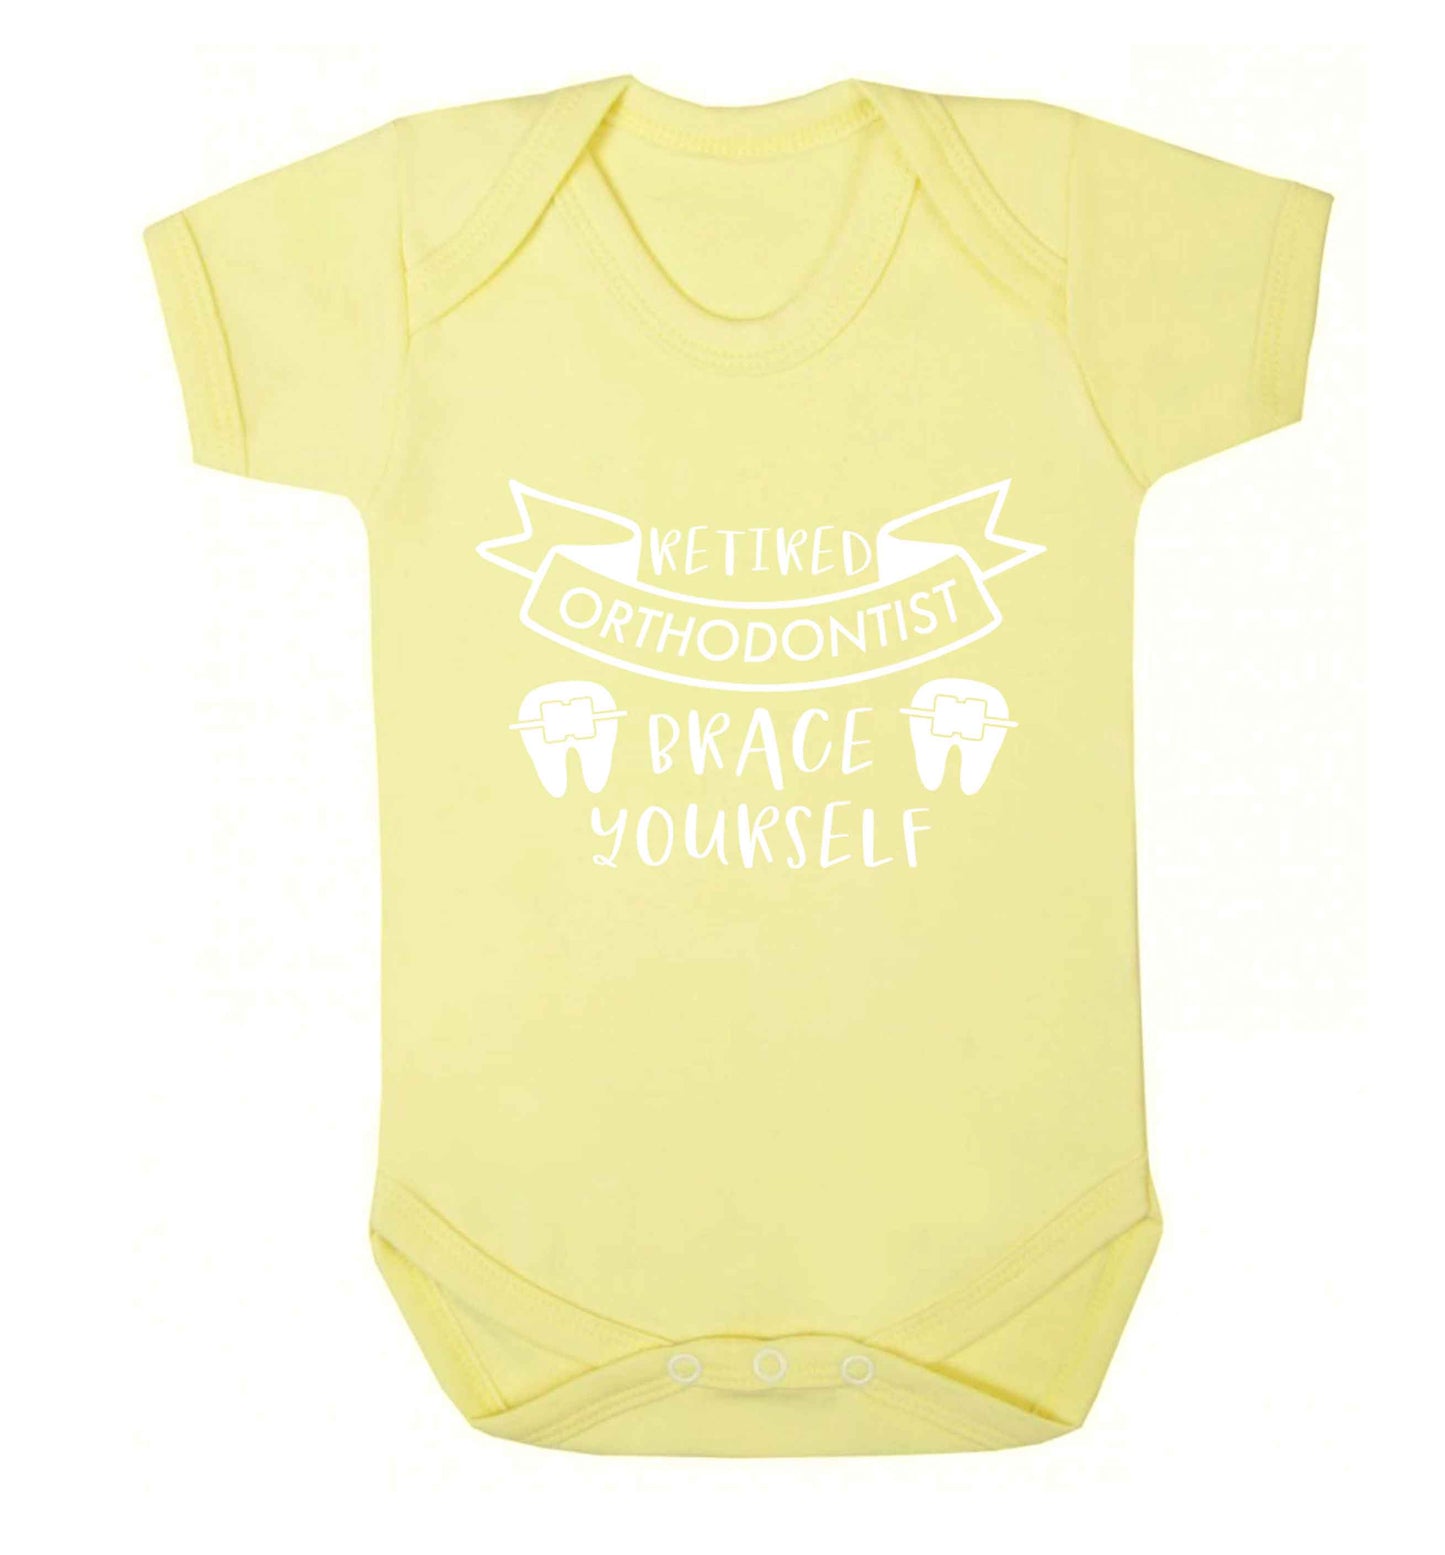 Retired orthodontist brace yourself Baby Vest pale yellow 18-24 months